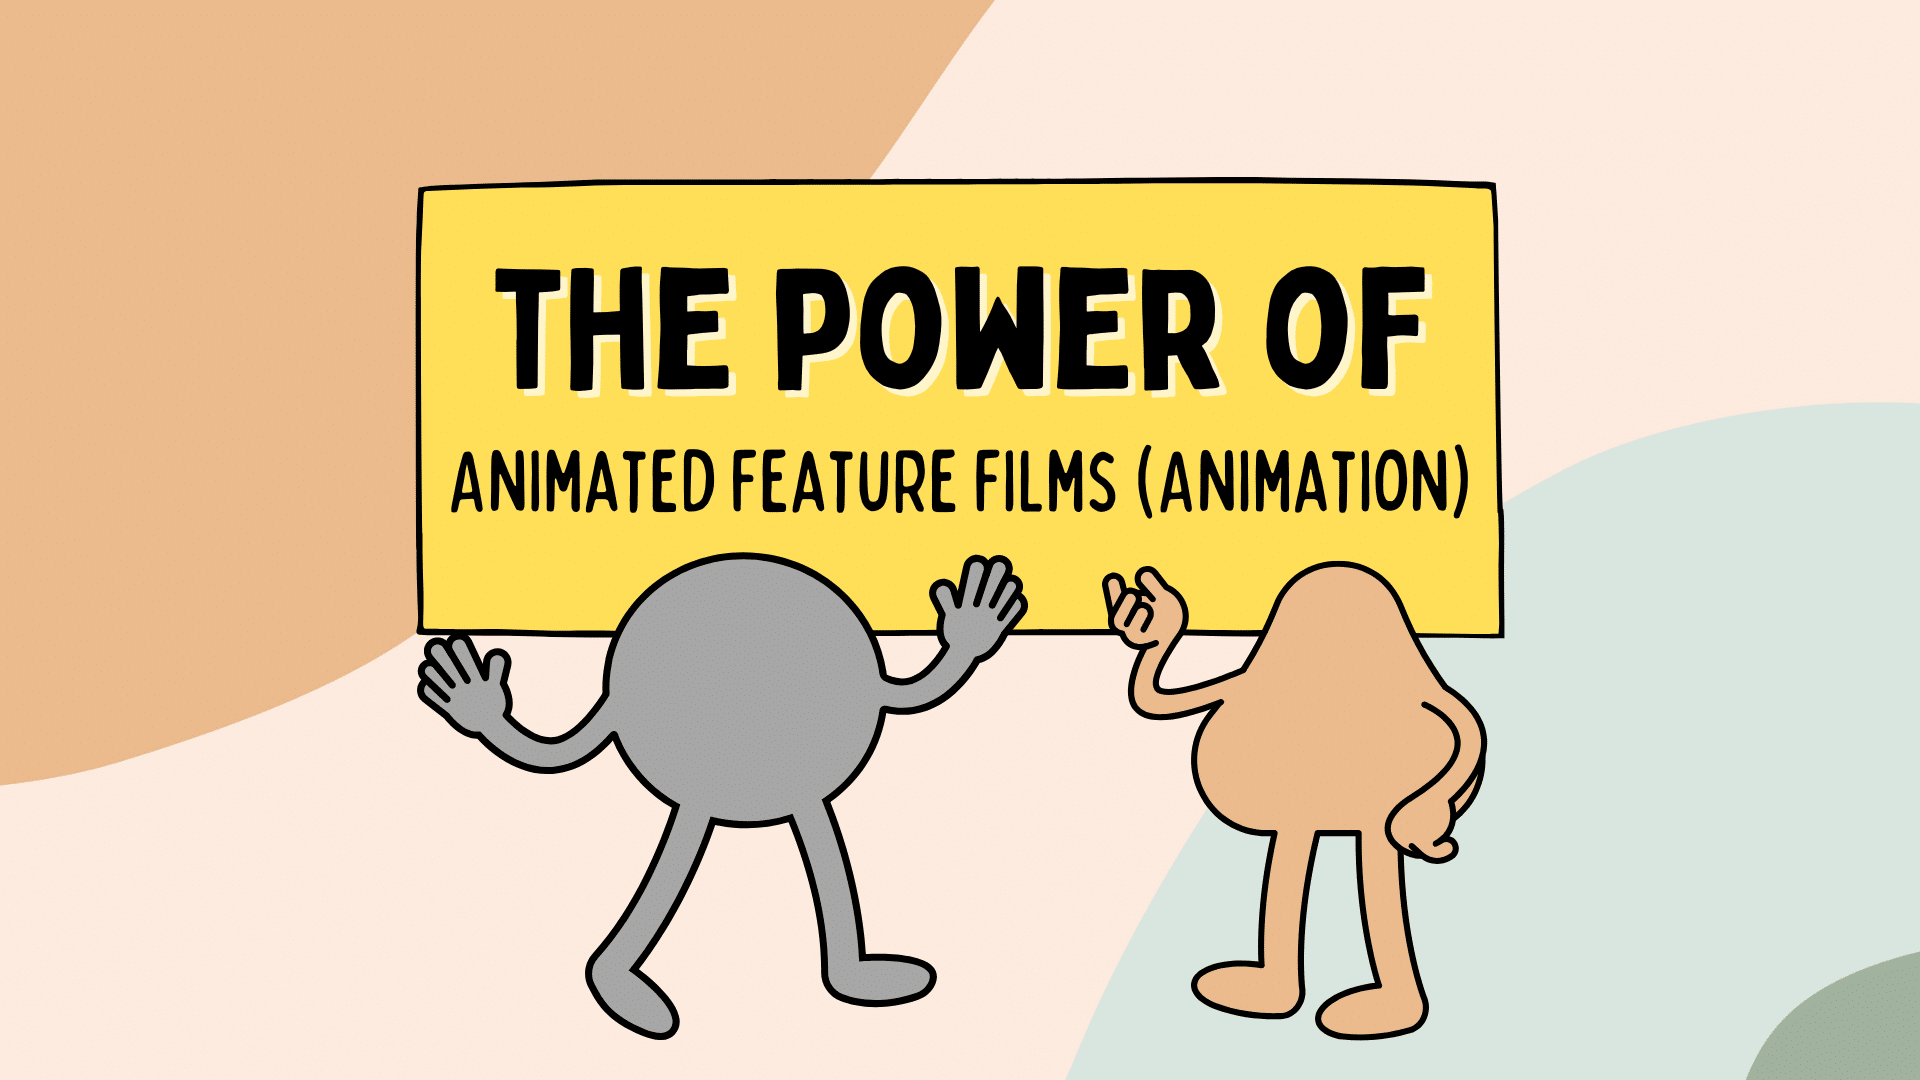 The Power of Animated feature films (Animation)